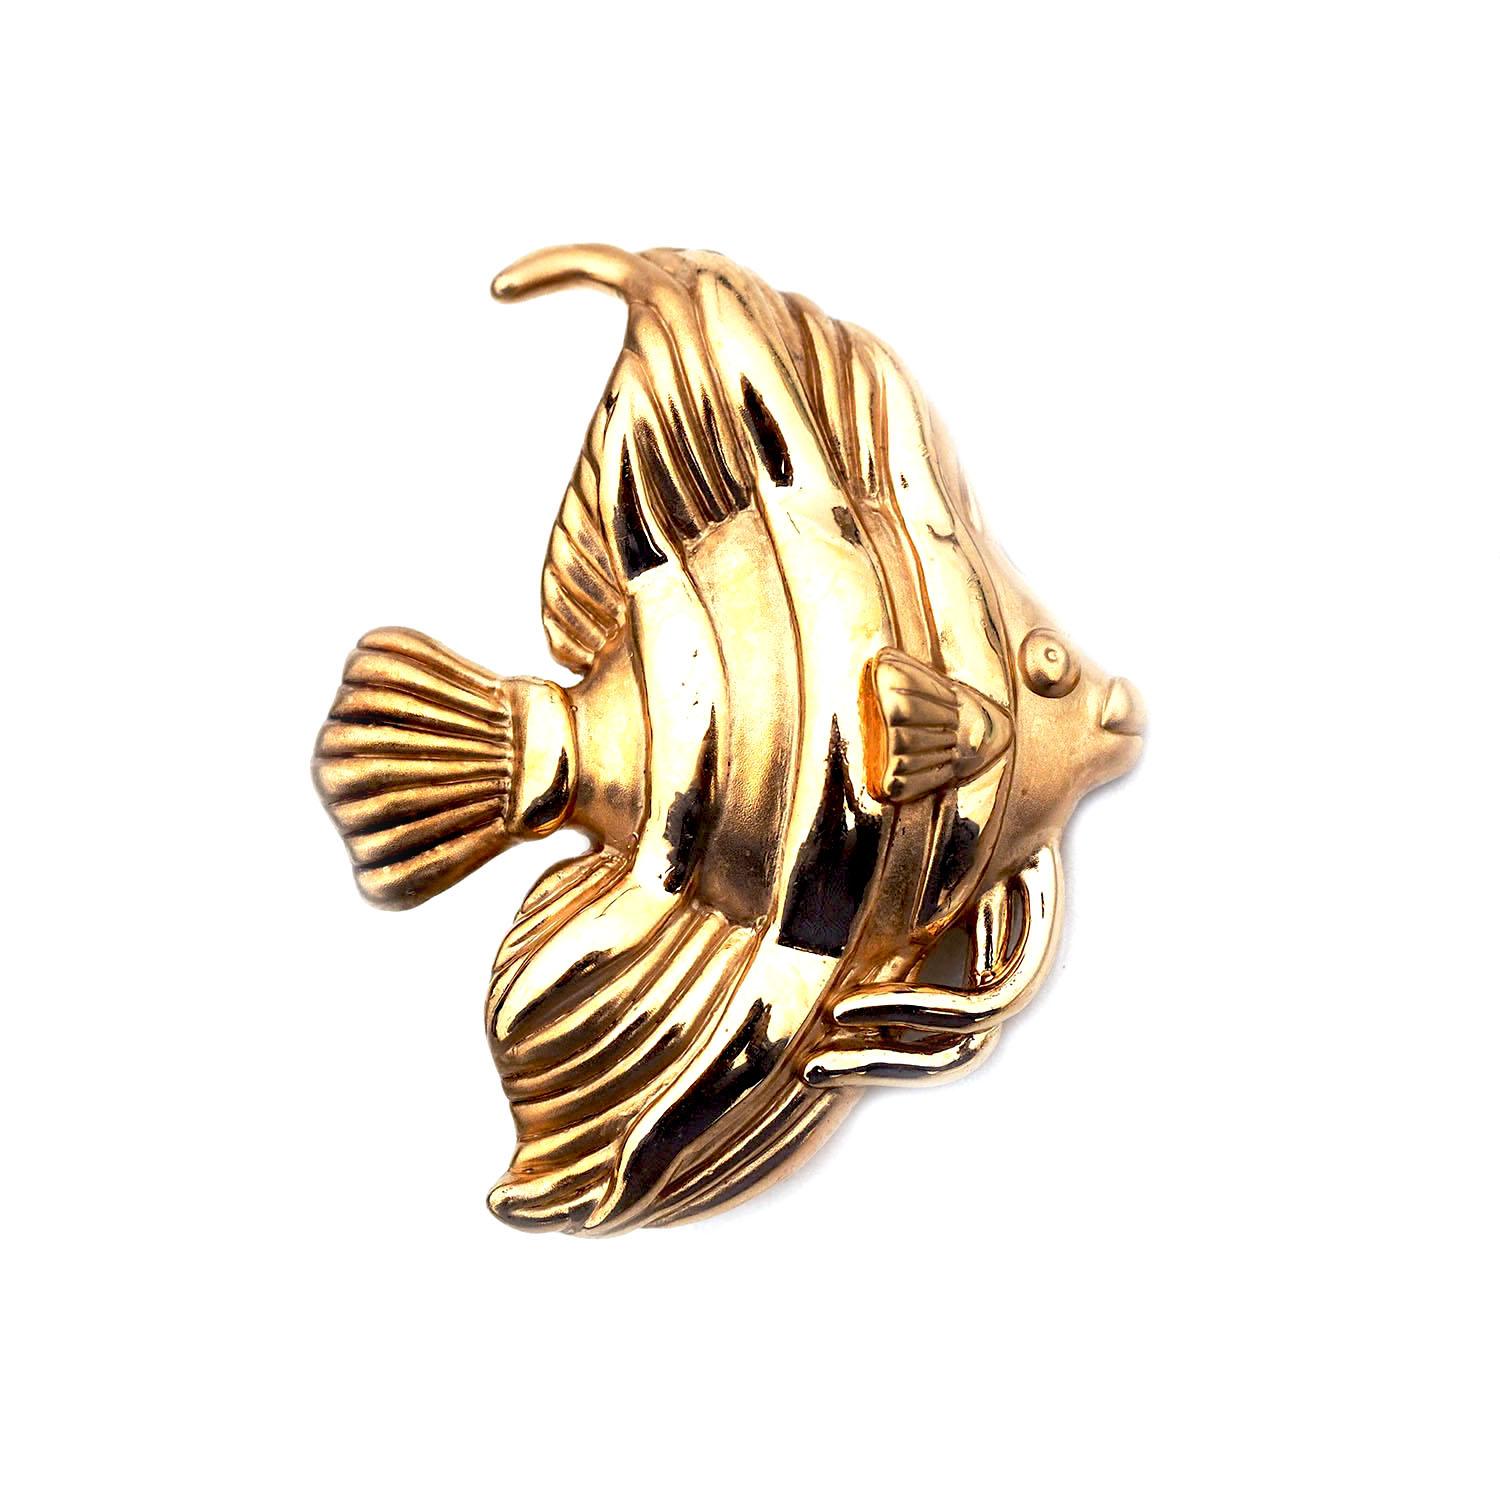 Please see this unique and fun 14k Yellow Gold Angel Fish Pin. I have shot images from various angles so you can see it completely (both front and back). This piece weighs 4.3 grams total. 